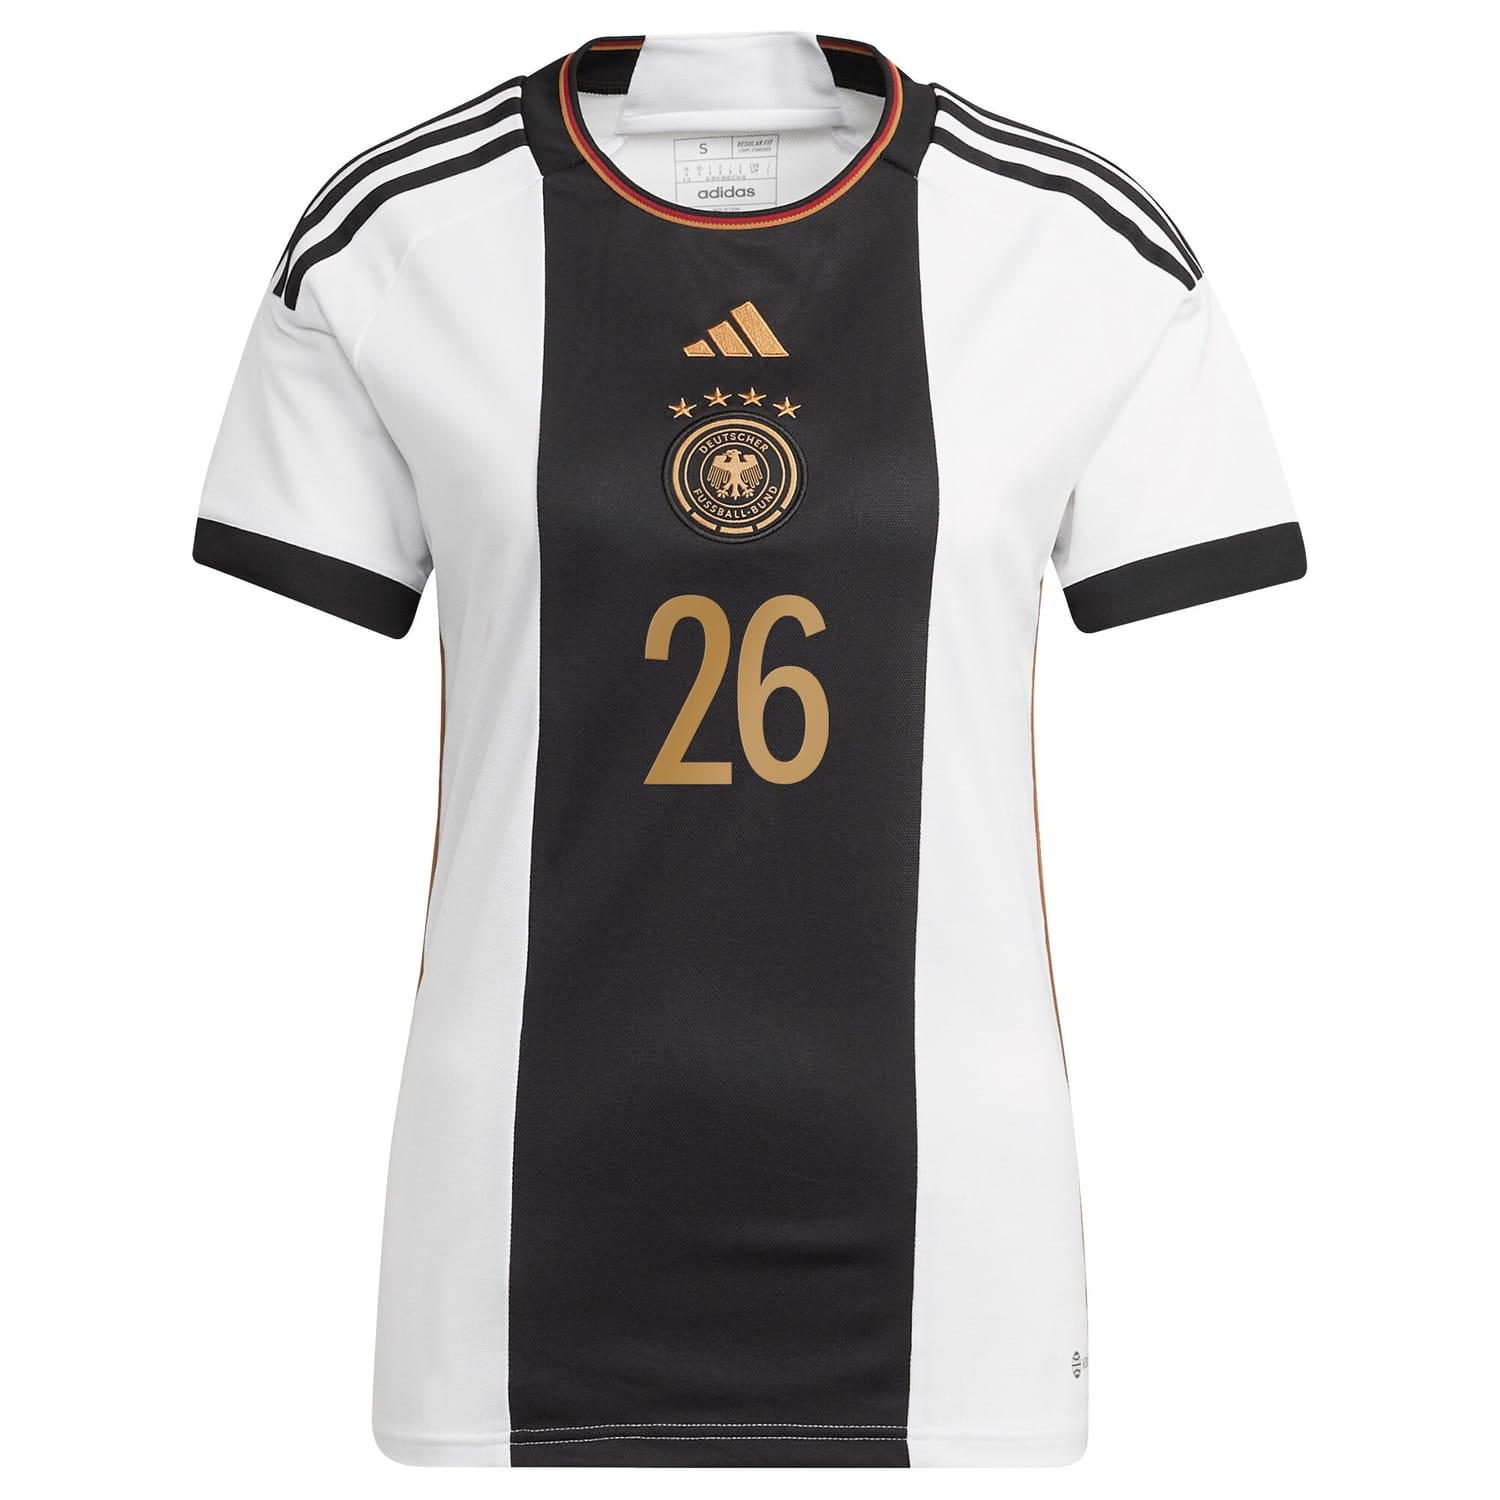 Germany National Team Home Jersey Shirt 2022 player Youssoufa Moukoko 26 printing for Women